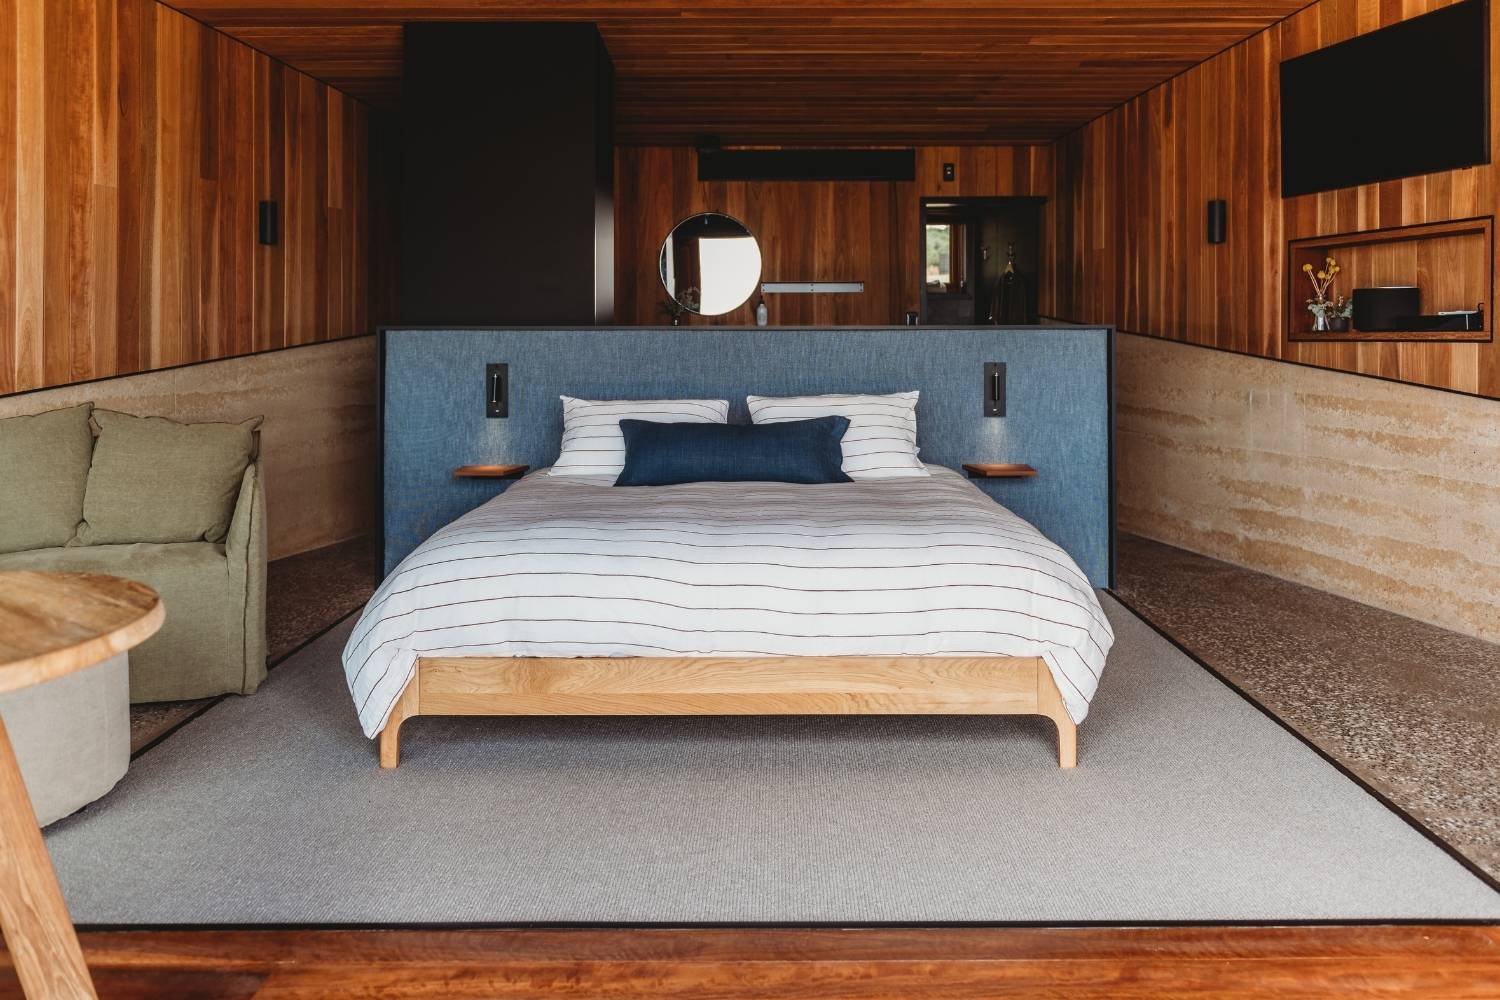 A luxurious bed adorned with a blue bed head, set against a backdrop of premium wood in a beautifully crafted bedroom space. The image exudes elegance and sophistication, with the rich tones of the wood complementing the serene blue hue of the bed head.